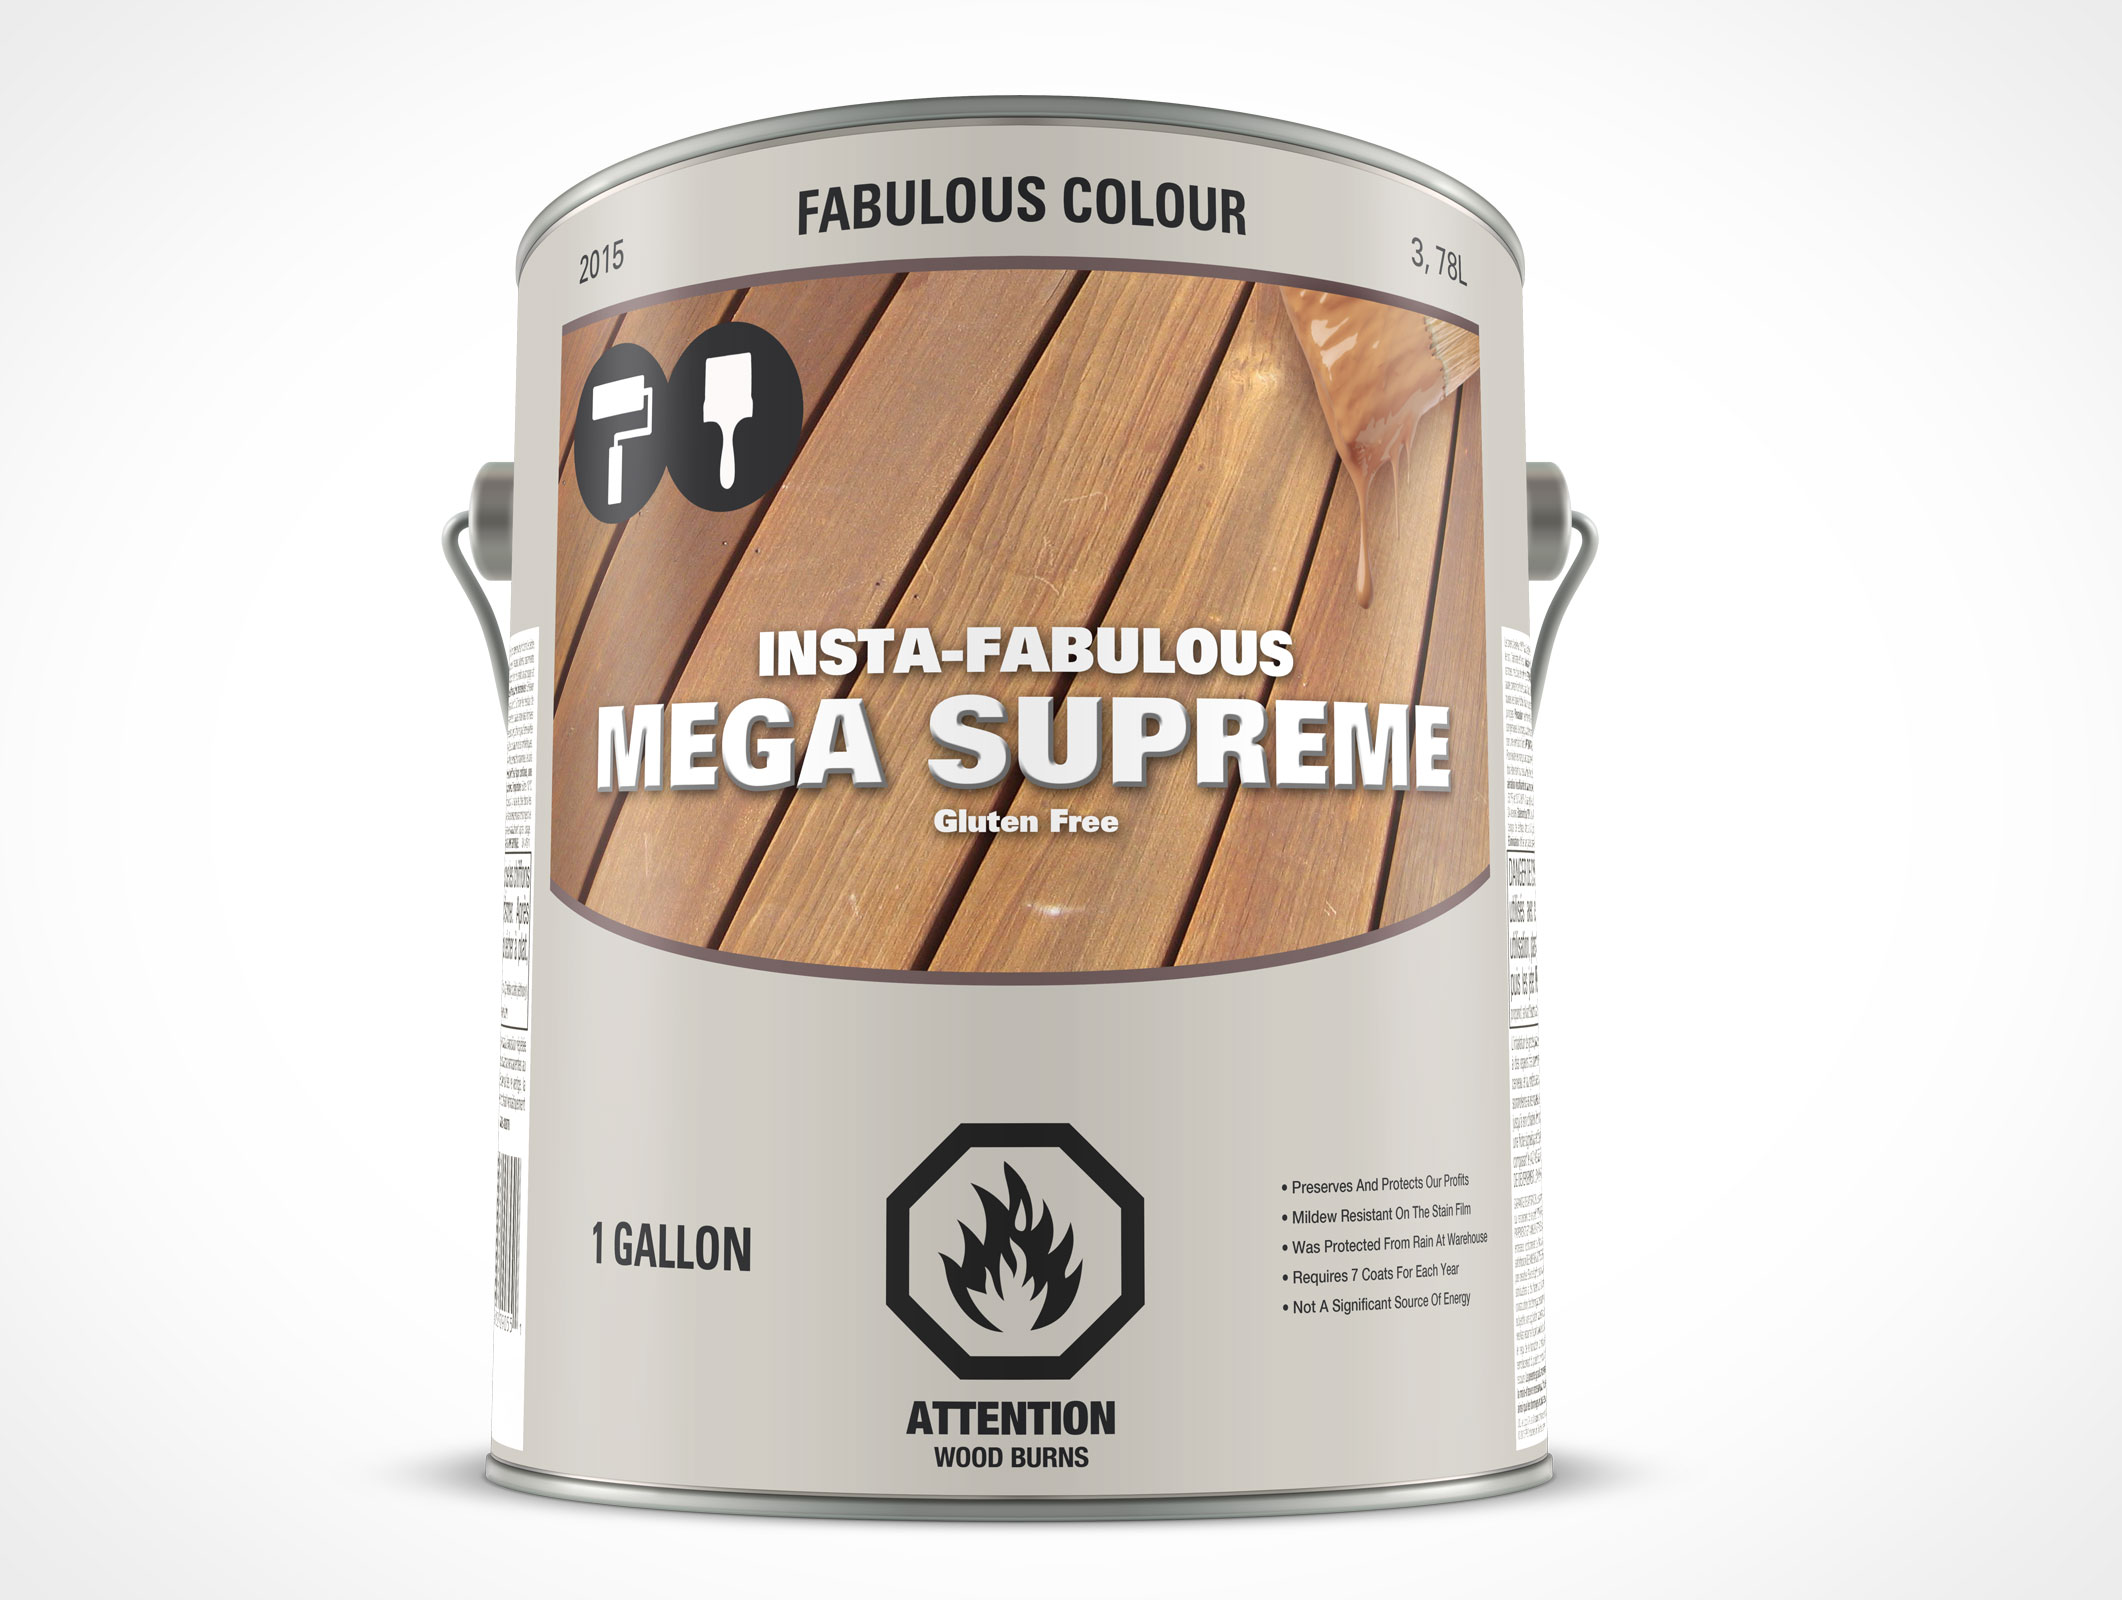 1 Gallon Paint Can Mockup 21r5